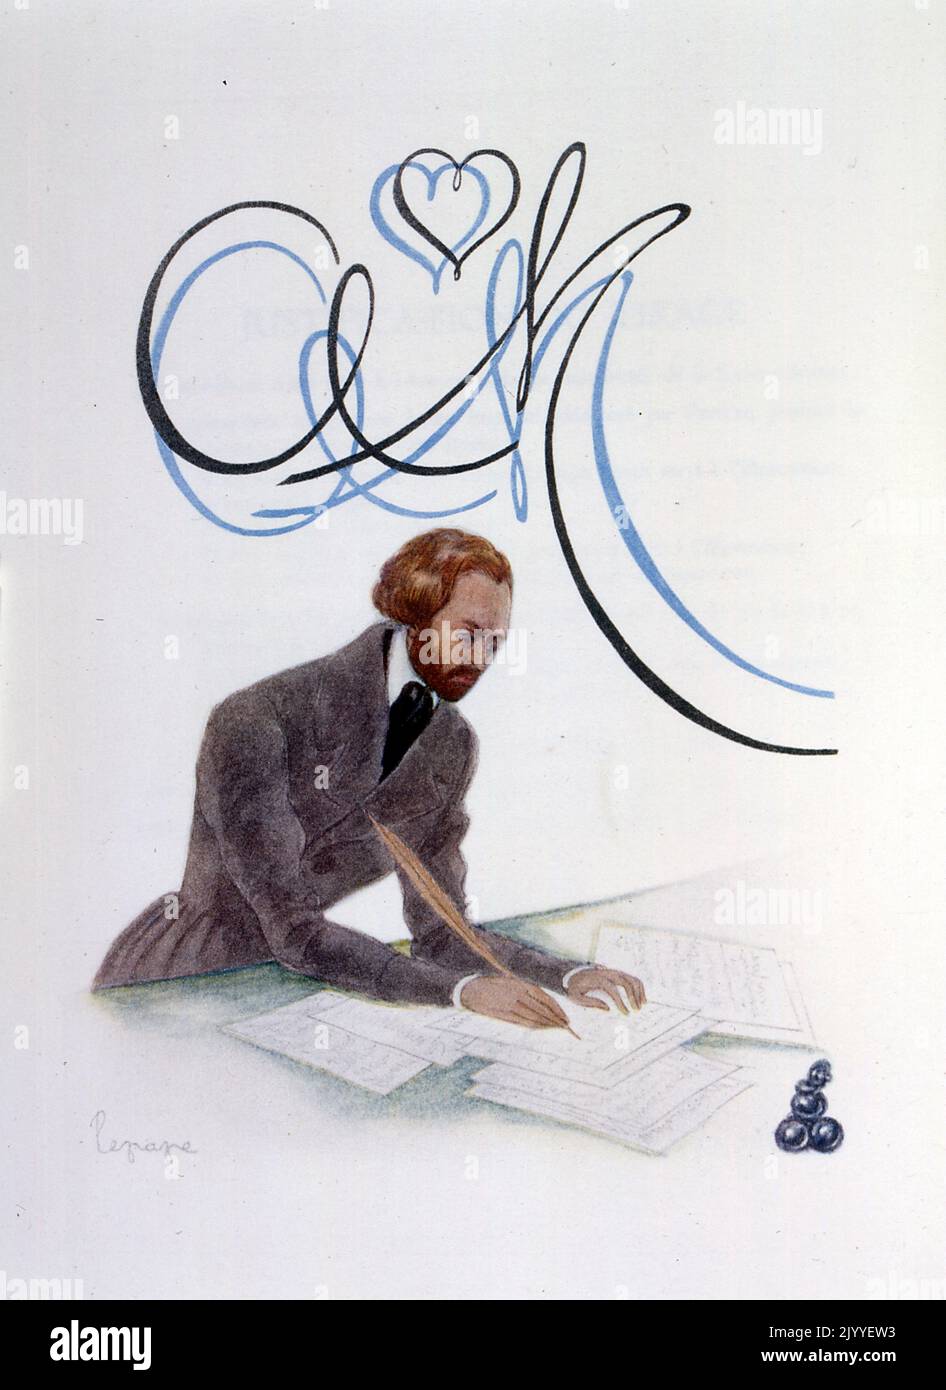 Portrait of Alfred de Musset at his writing desk with a quill; By Georges Lepape (1887-1971), French poster artist, illustrator and fashion designer. Stock Photo